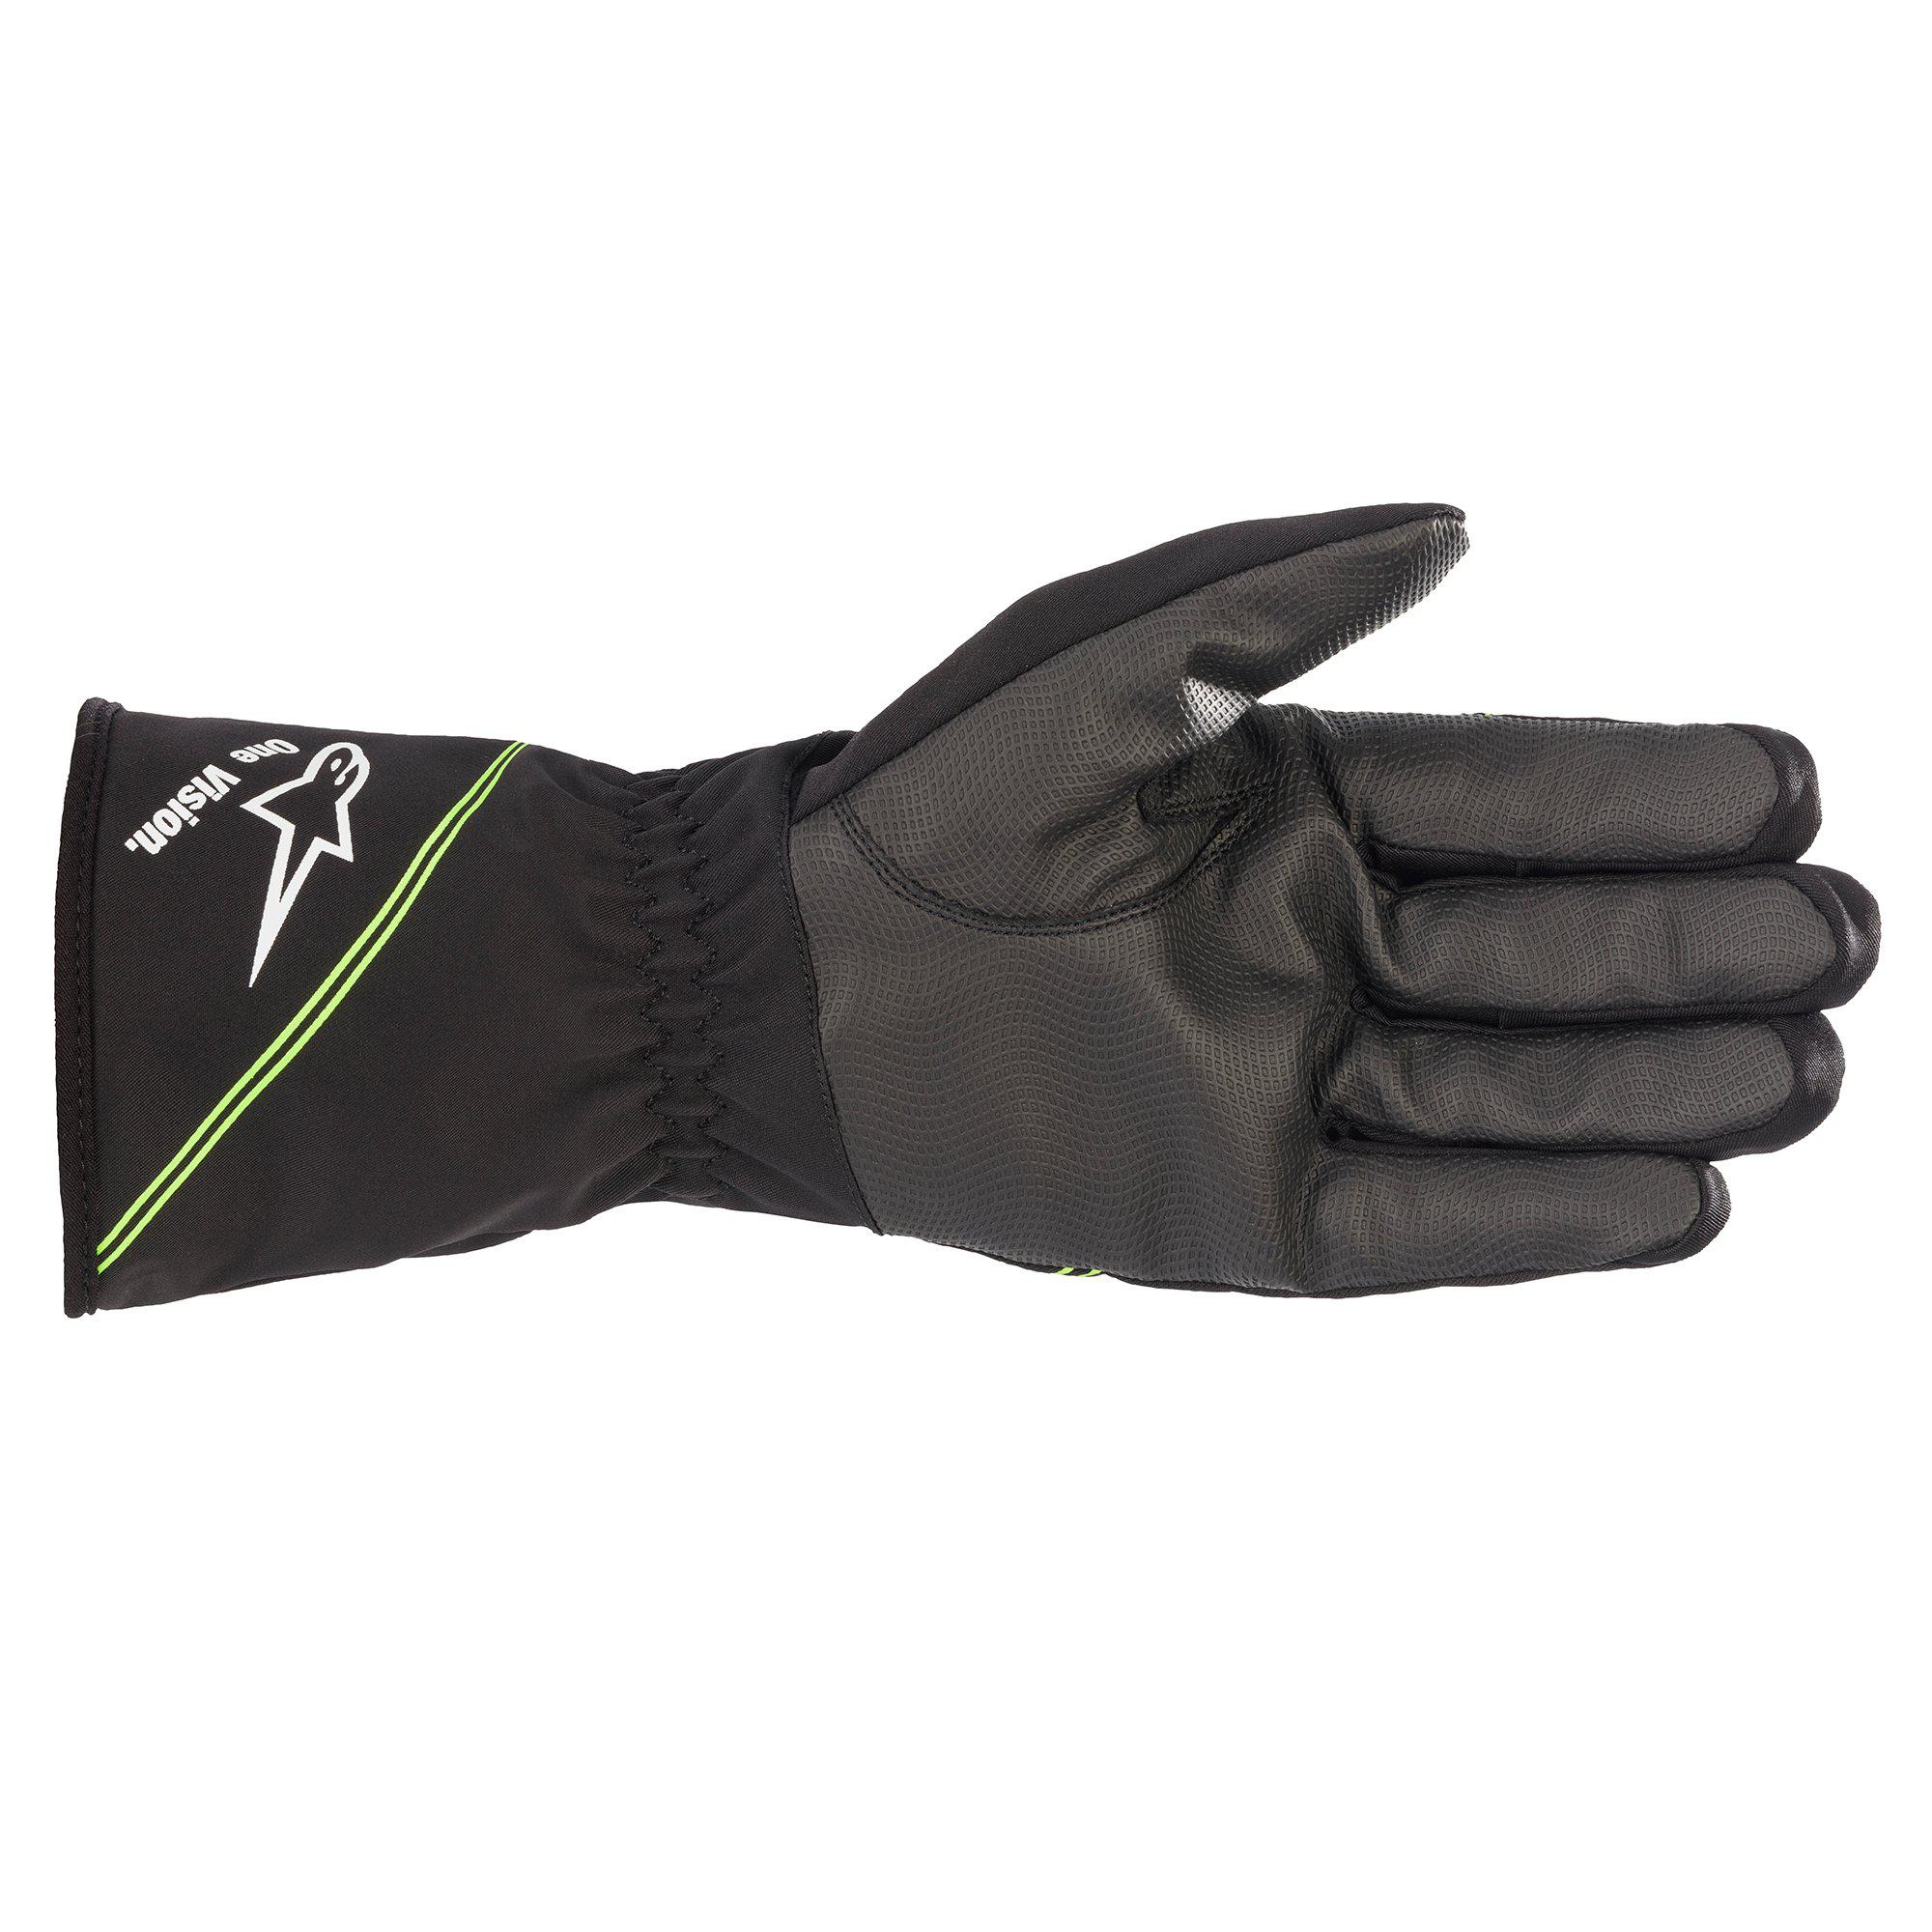 Tempest V2 Youth Waterproof Gloves